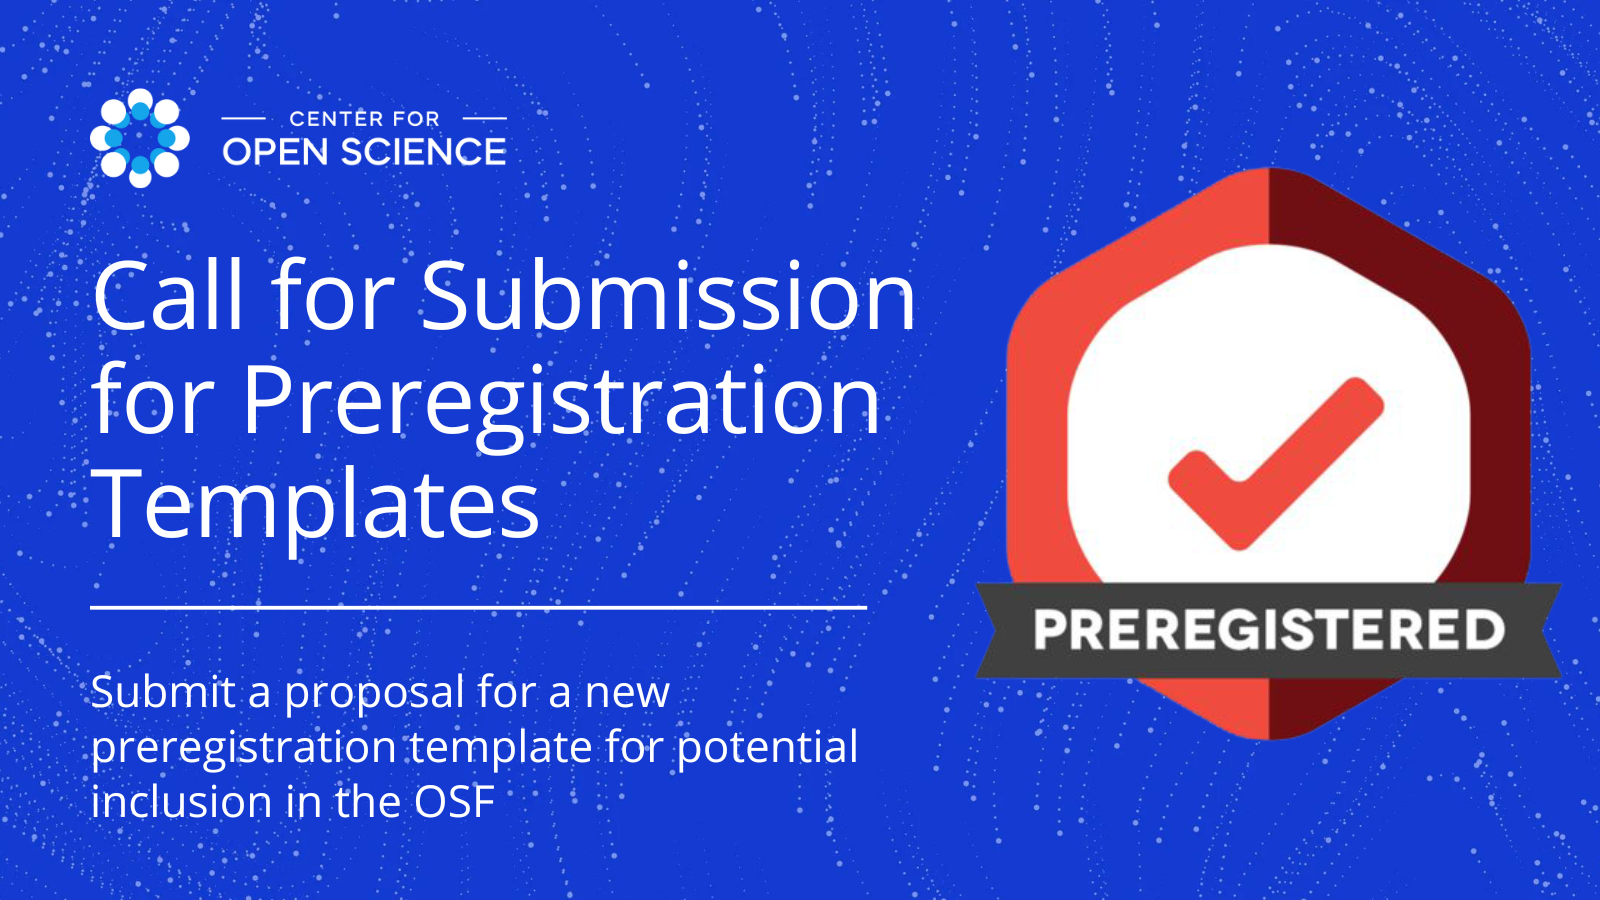 Call for Submissions for Preregistration Templates with preregistration badge